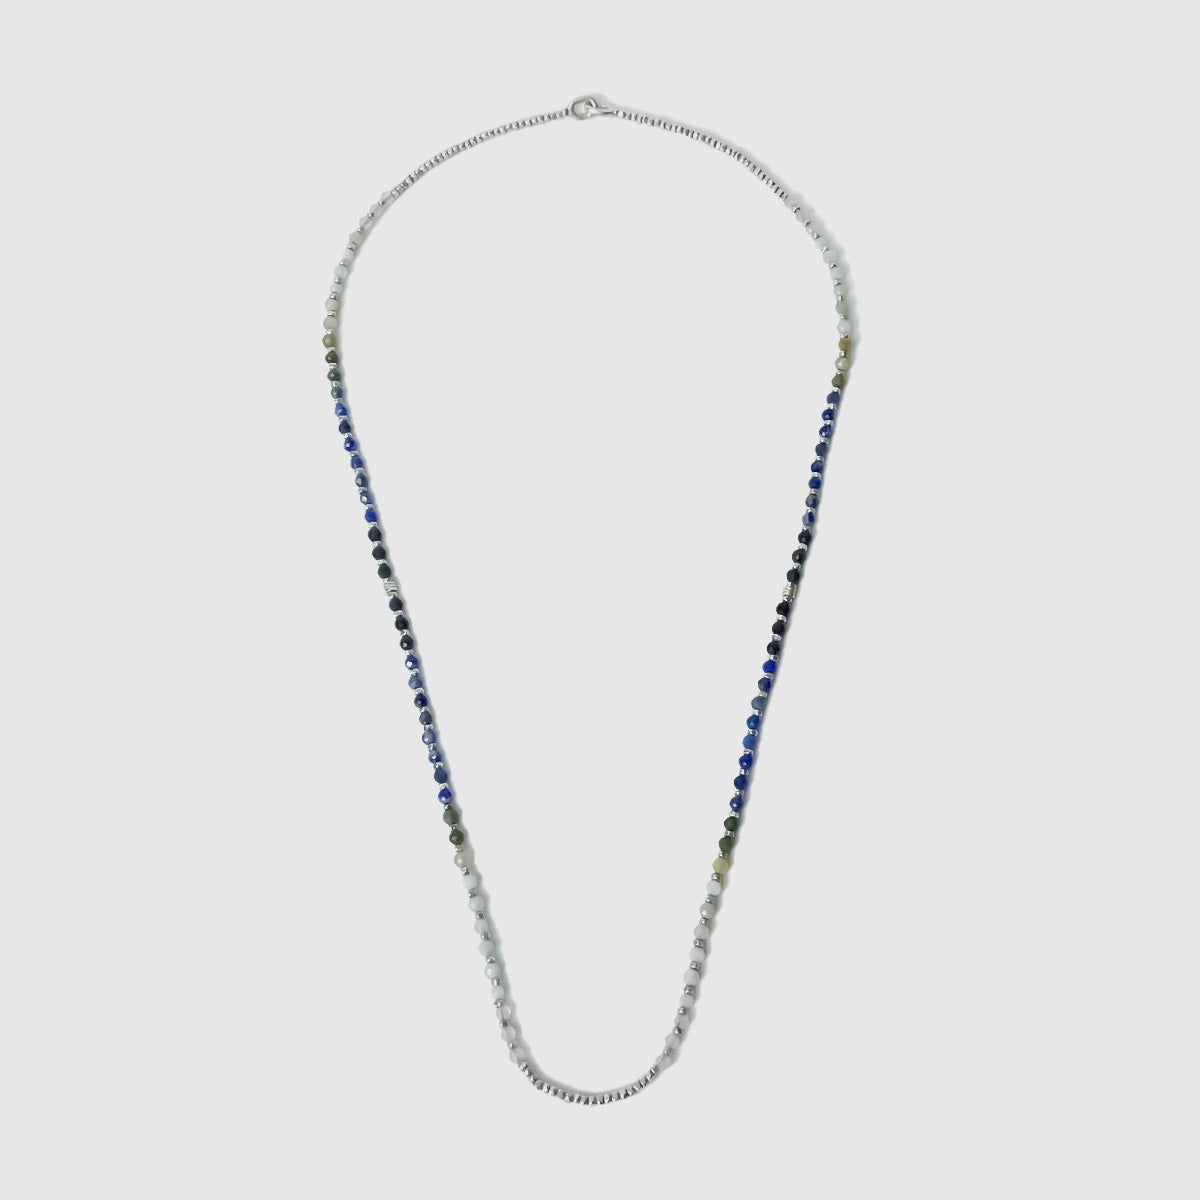 Crystal Necklace in Silver / Blue Pattern